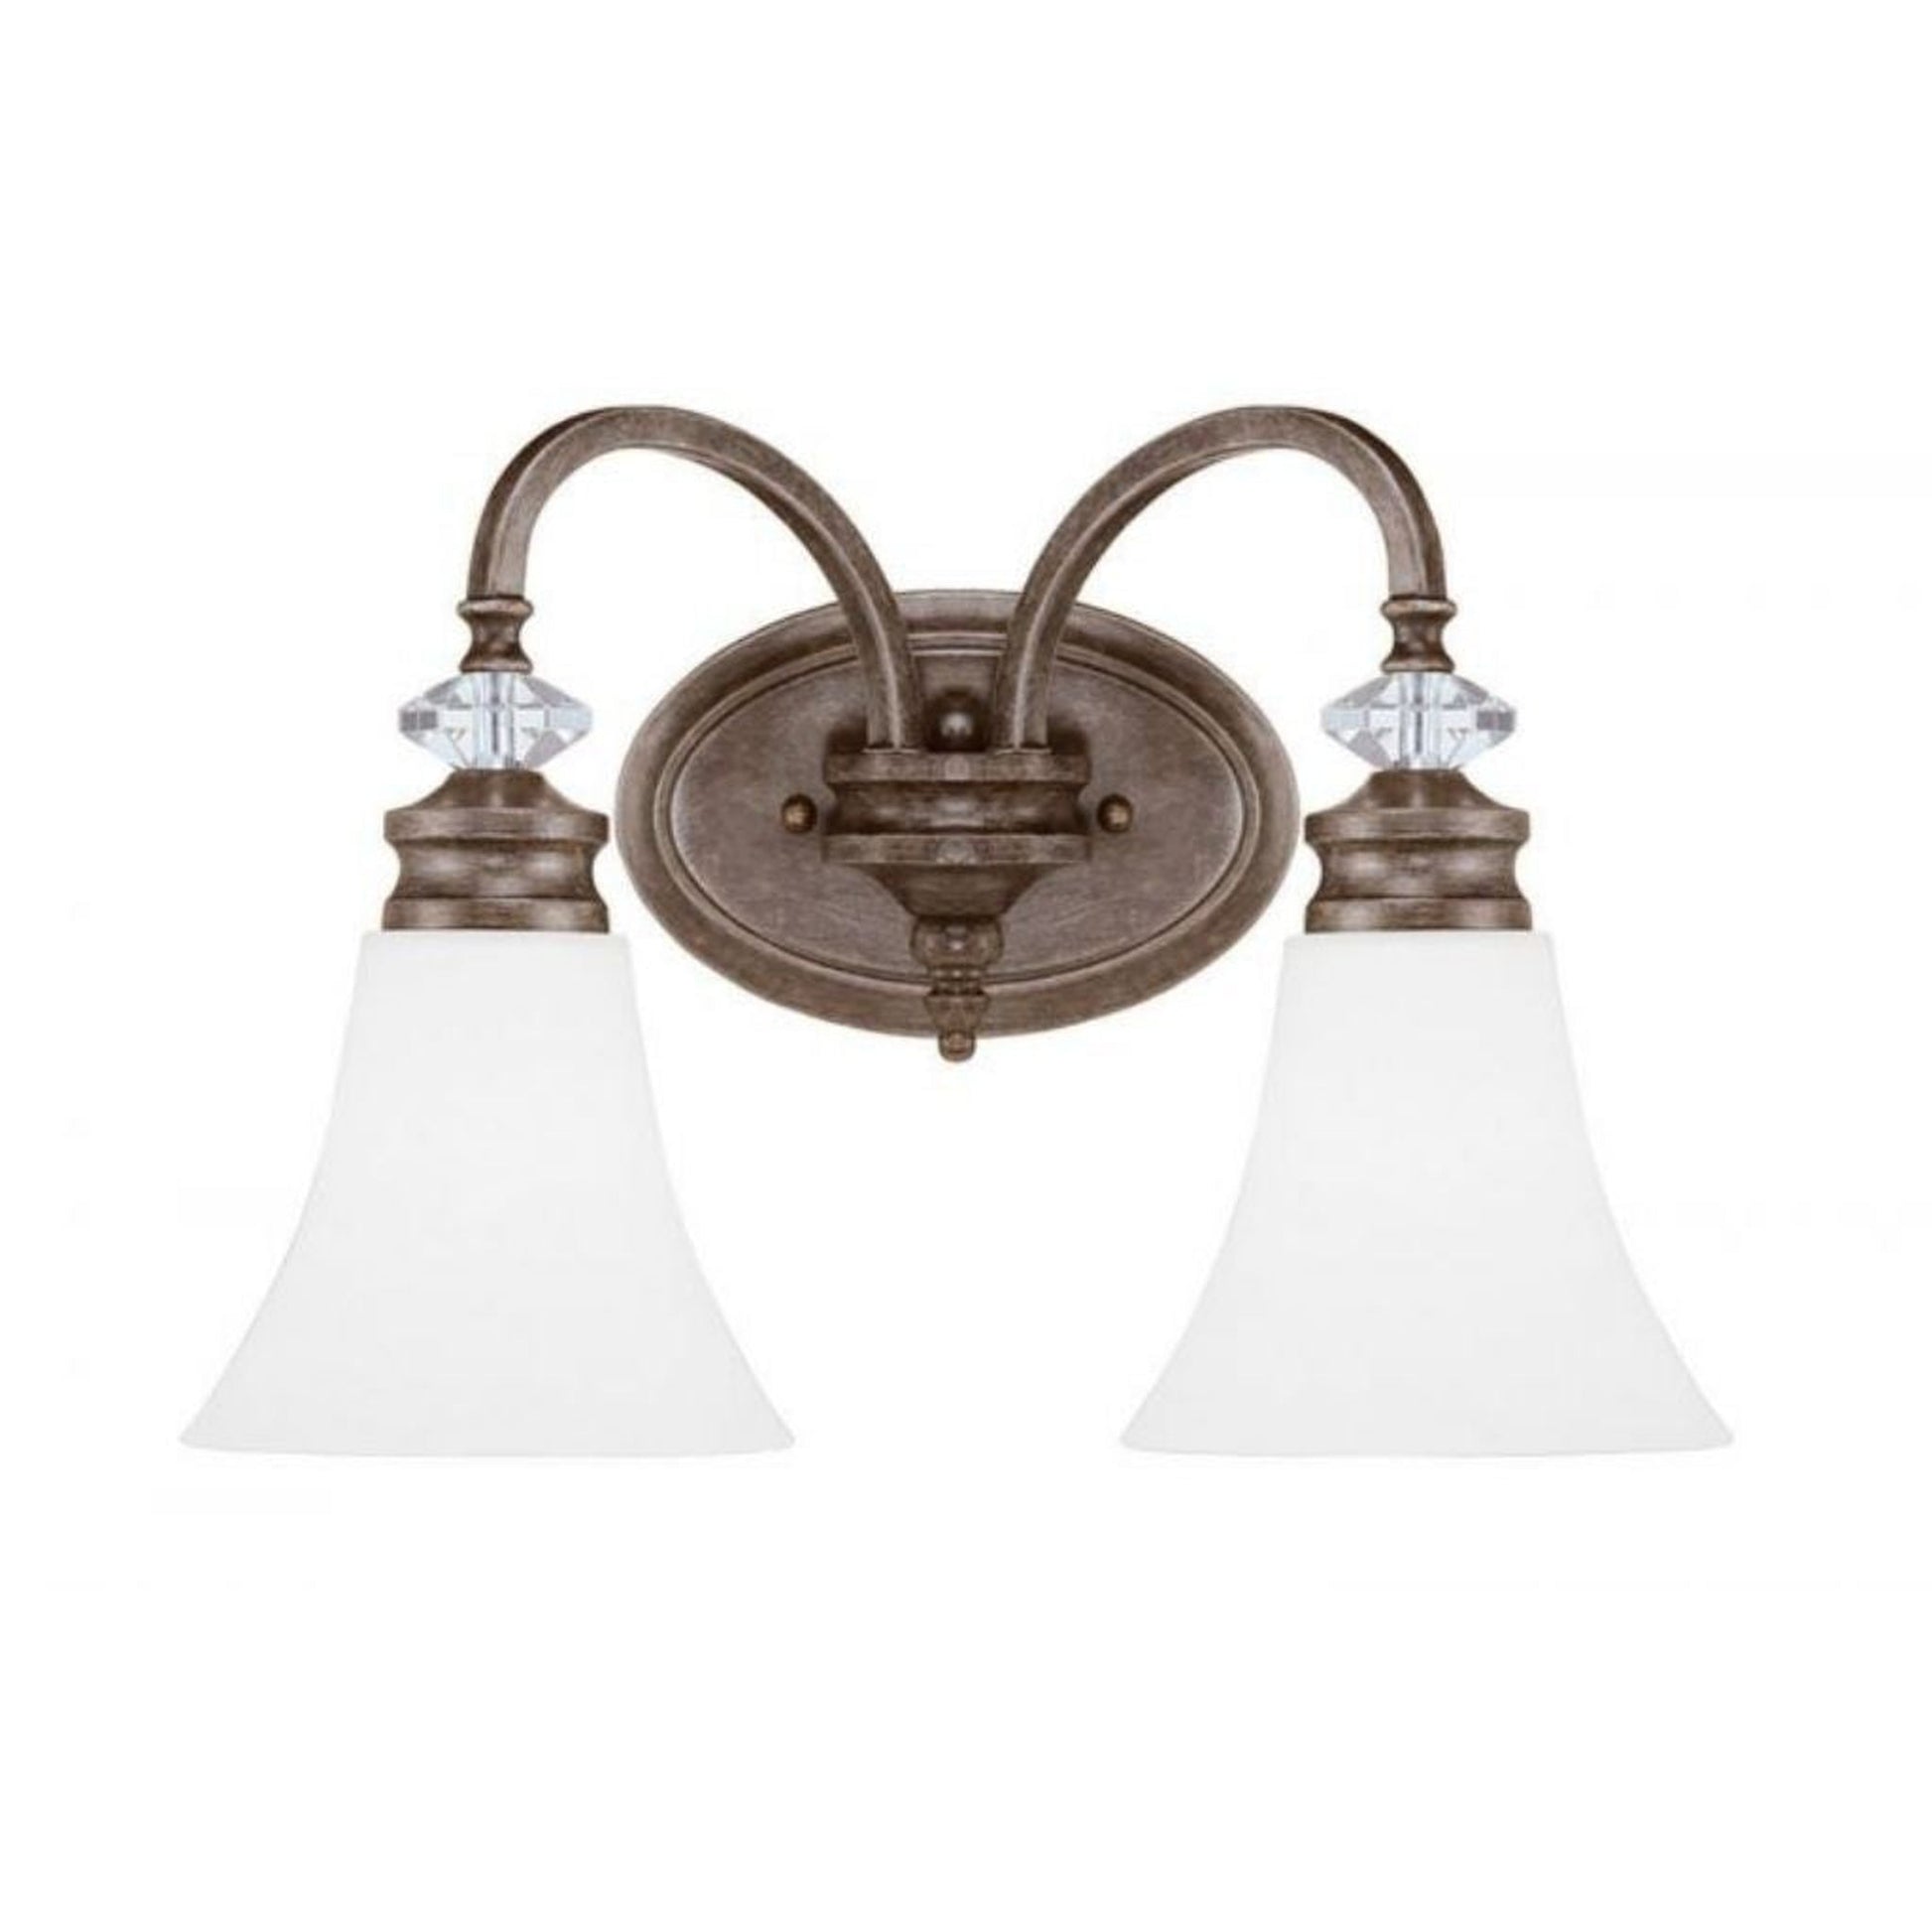 Craftmade Boulevard 17" 2-Light Mocha Bronze Wash Vanity Light With White Frosted Glass Shade